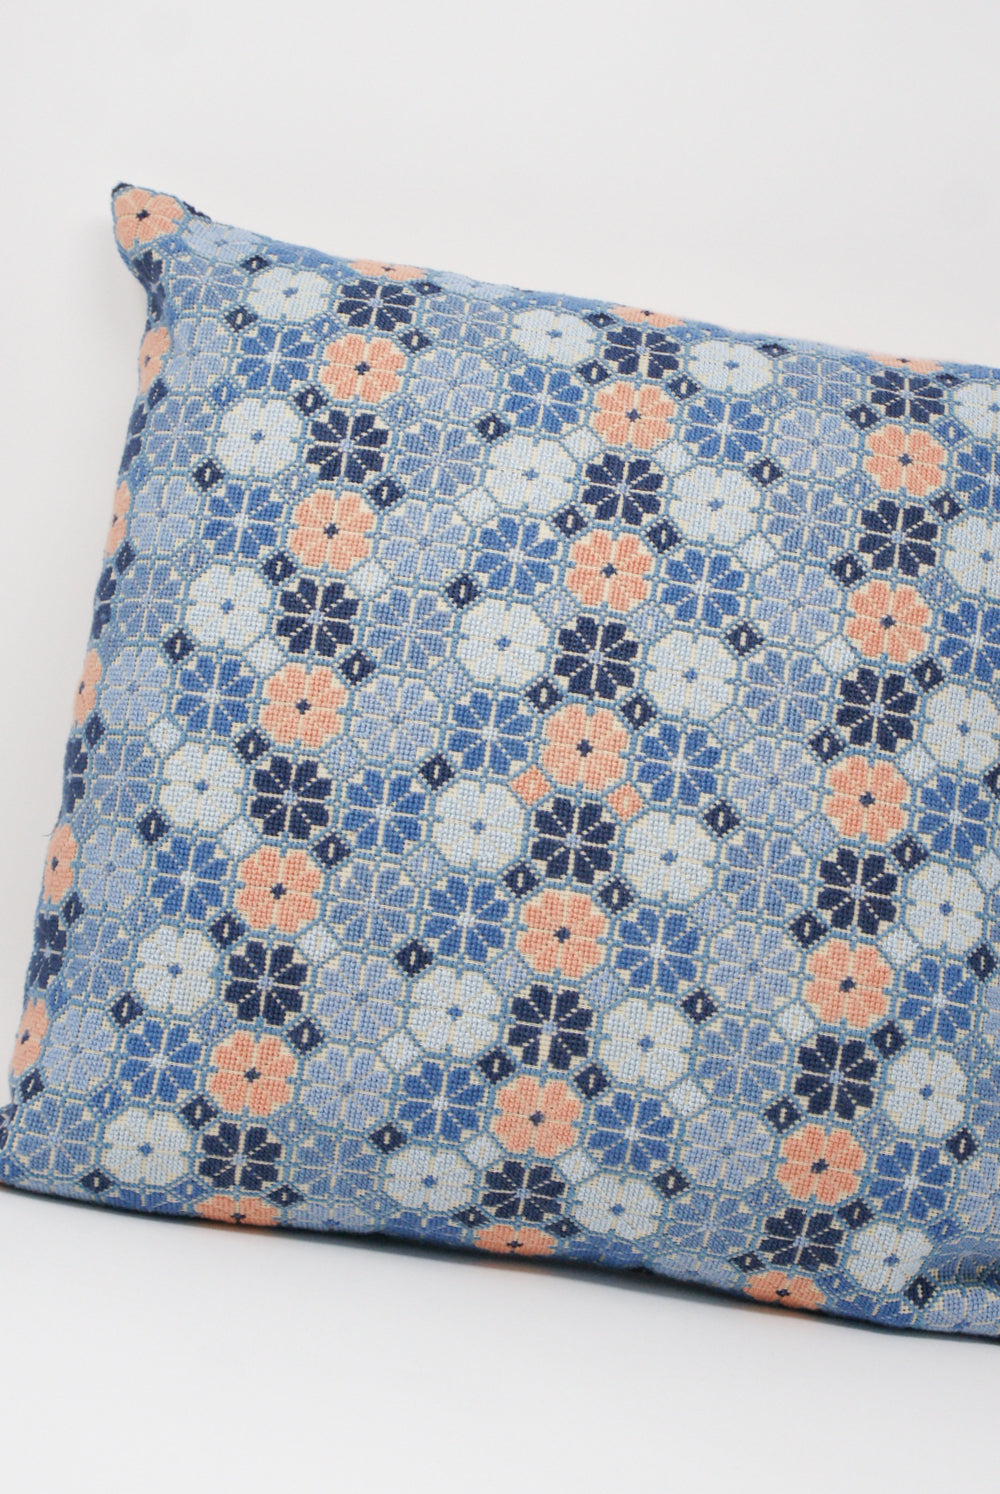 Kissweh Damask Rose Hand Embroidered Pillow in Indigo & Peach